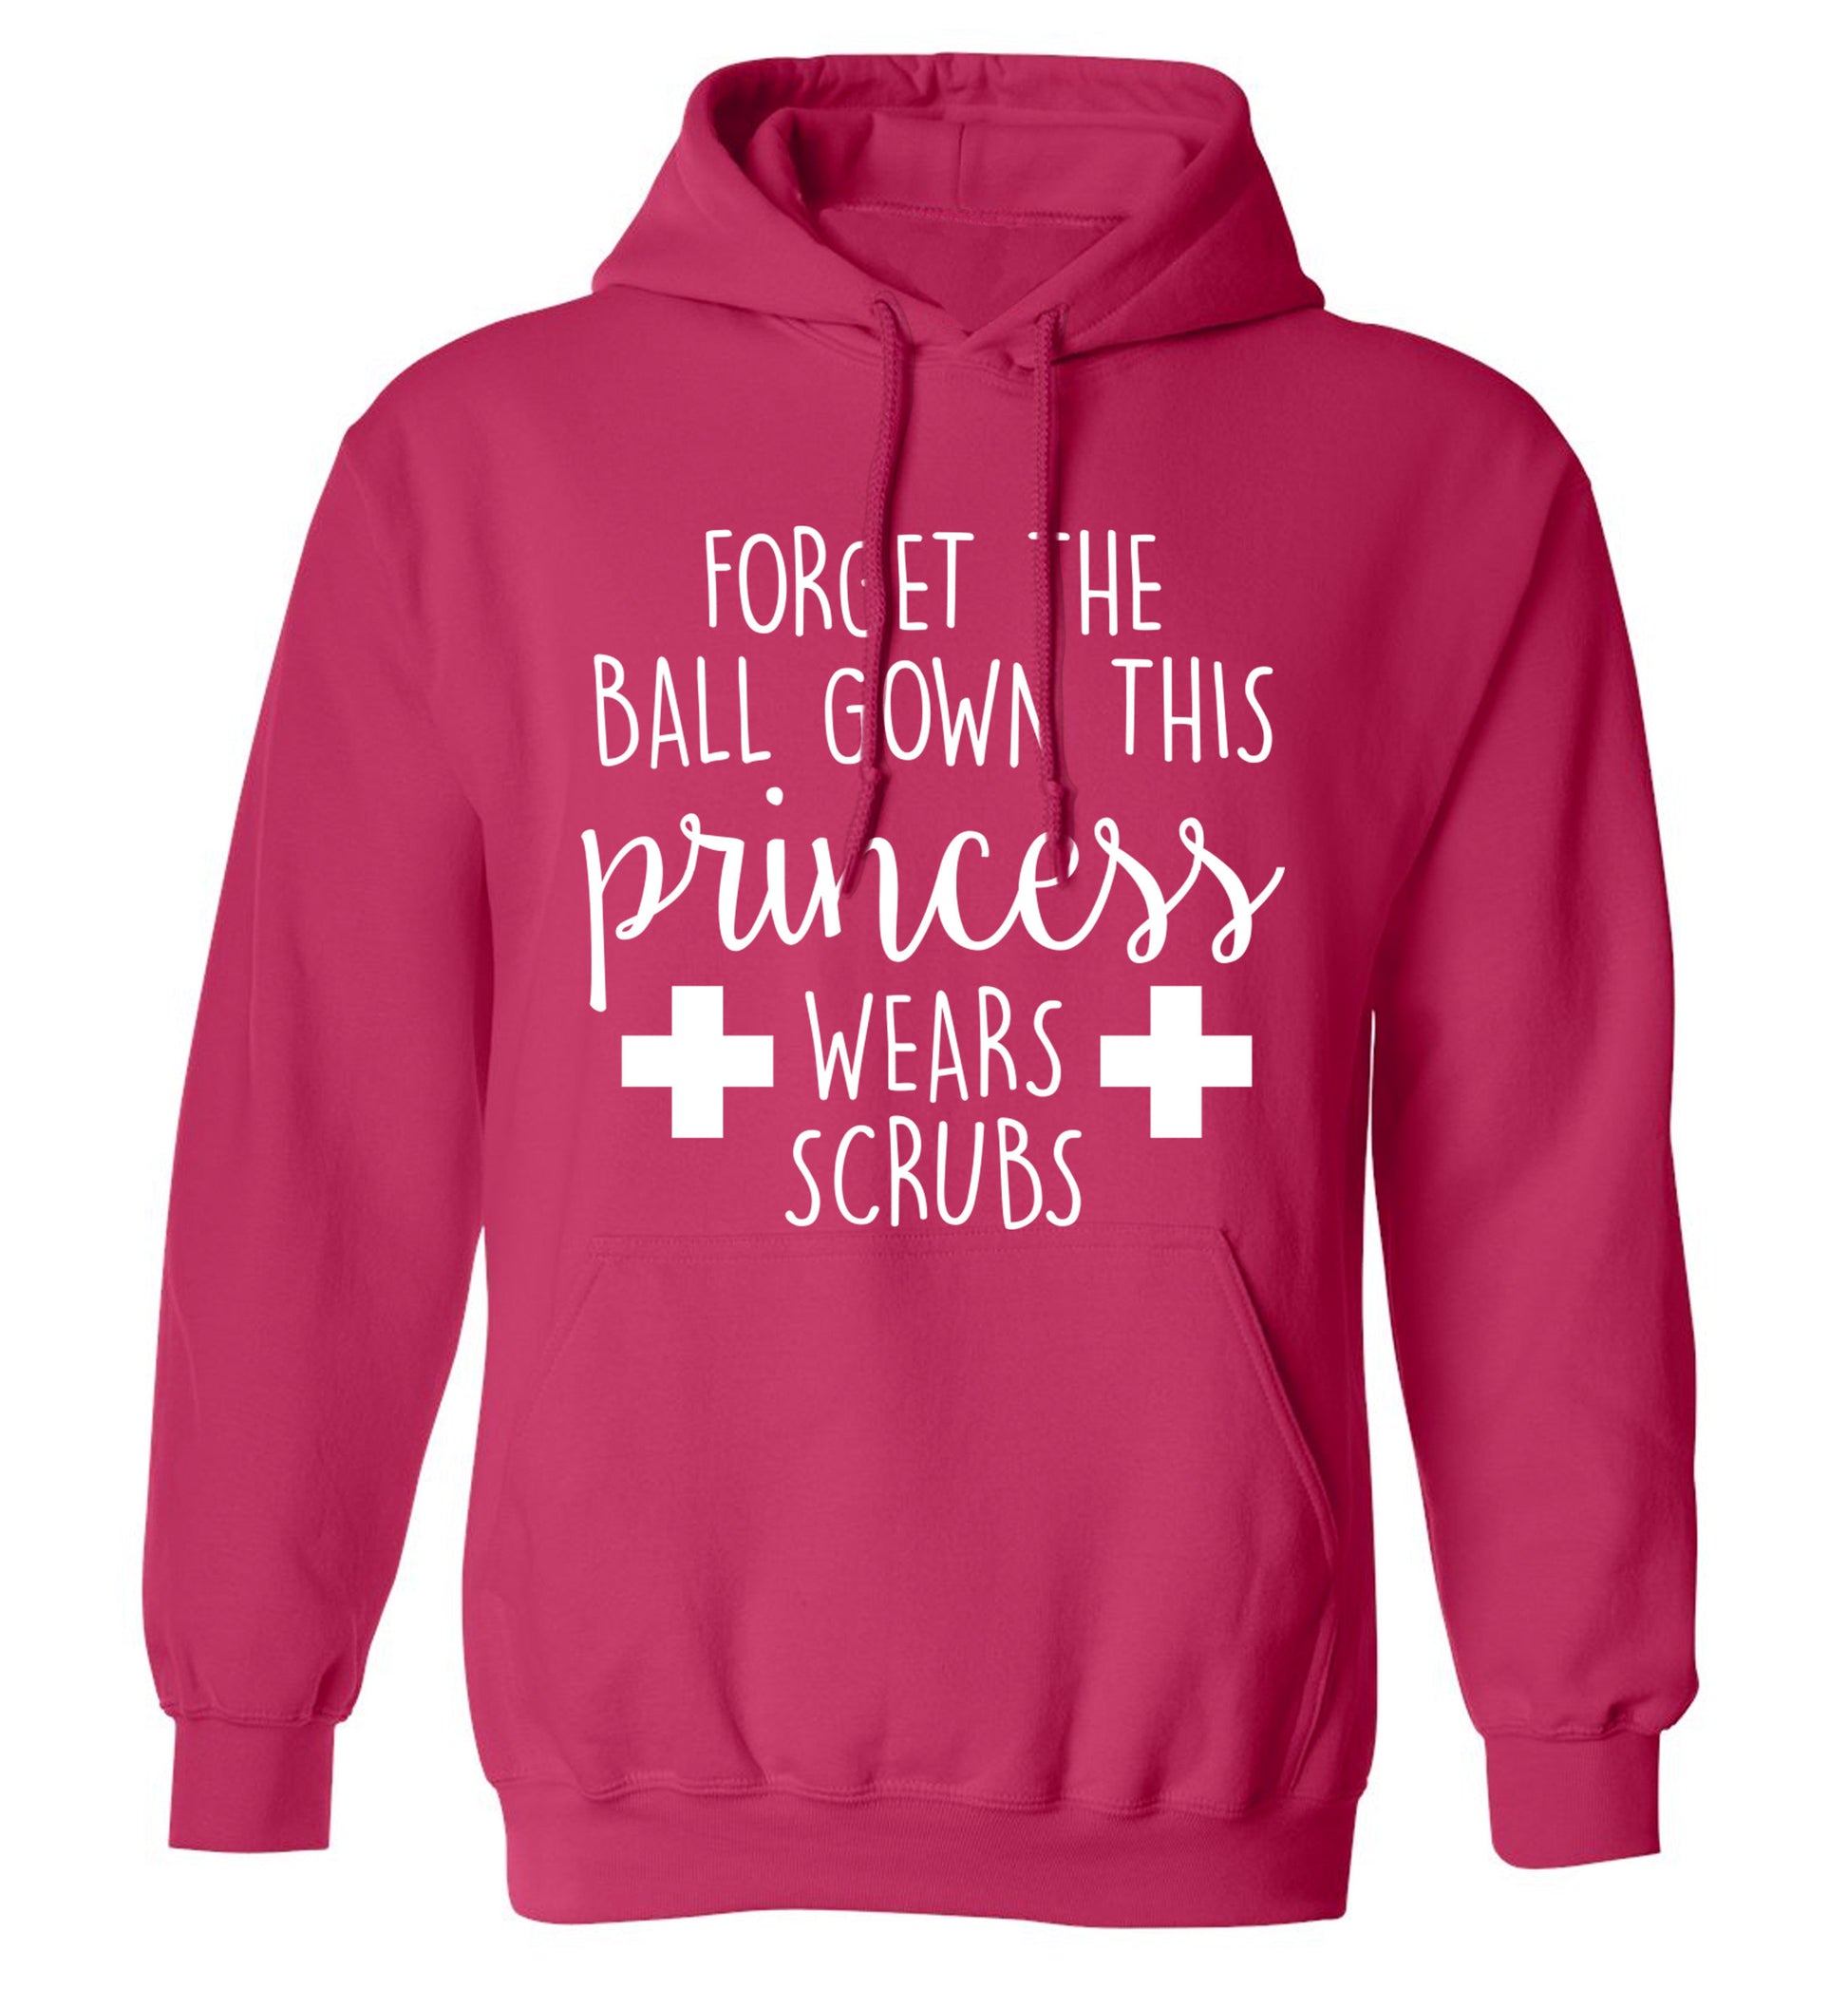 Forget the ball gown this princess wears scrubs adults unisex pink hoodie 2XL